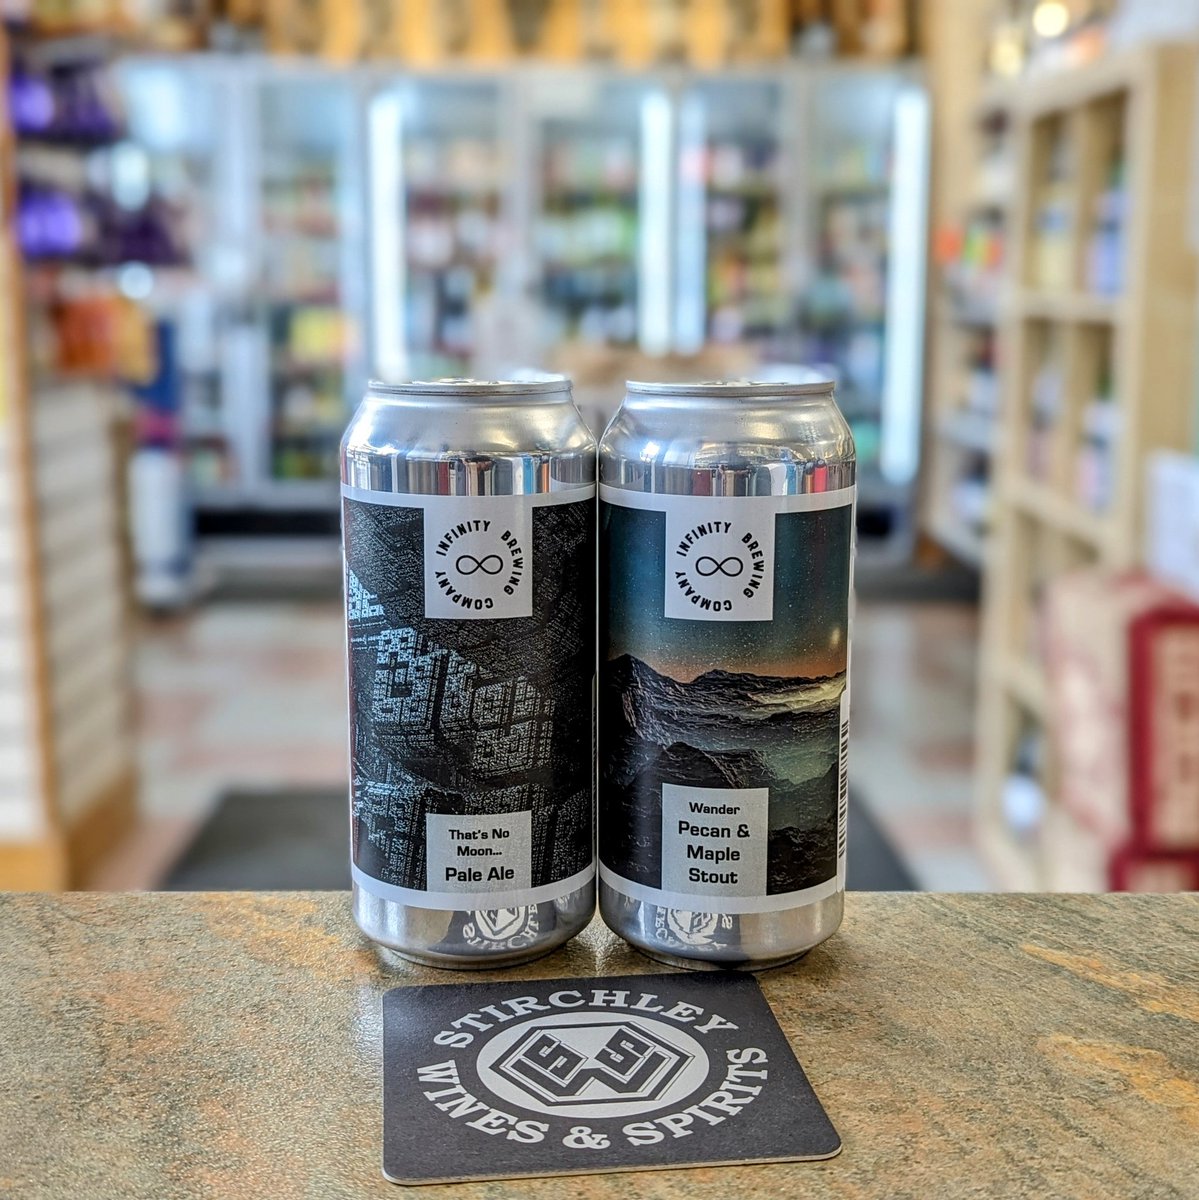 Fresh beer restock from local beer heroes, Maypole based @infinitybrewco.... 

🍺 That's No Moon... 4.5% Pale Ale
🍺 Wander 5.3% Pecan & Maple Stout

To Infinity and beyond! 💫
#VivaStirchley #VivaBrum #ShopIndependent #MadeInBirmingham🐂